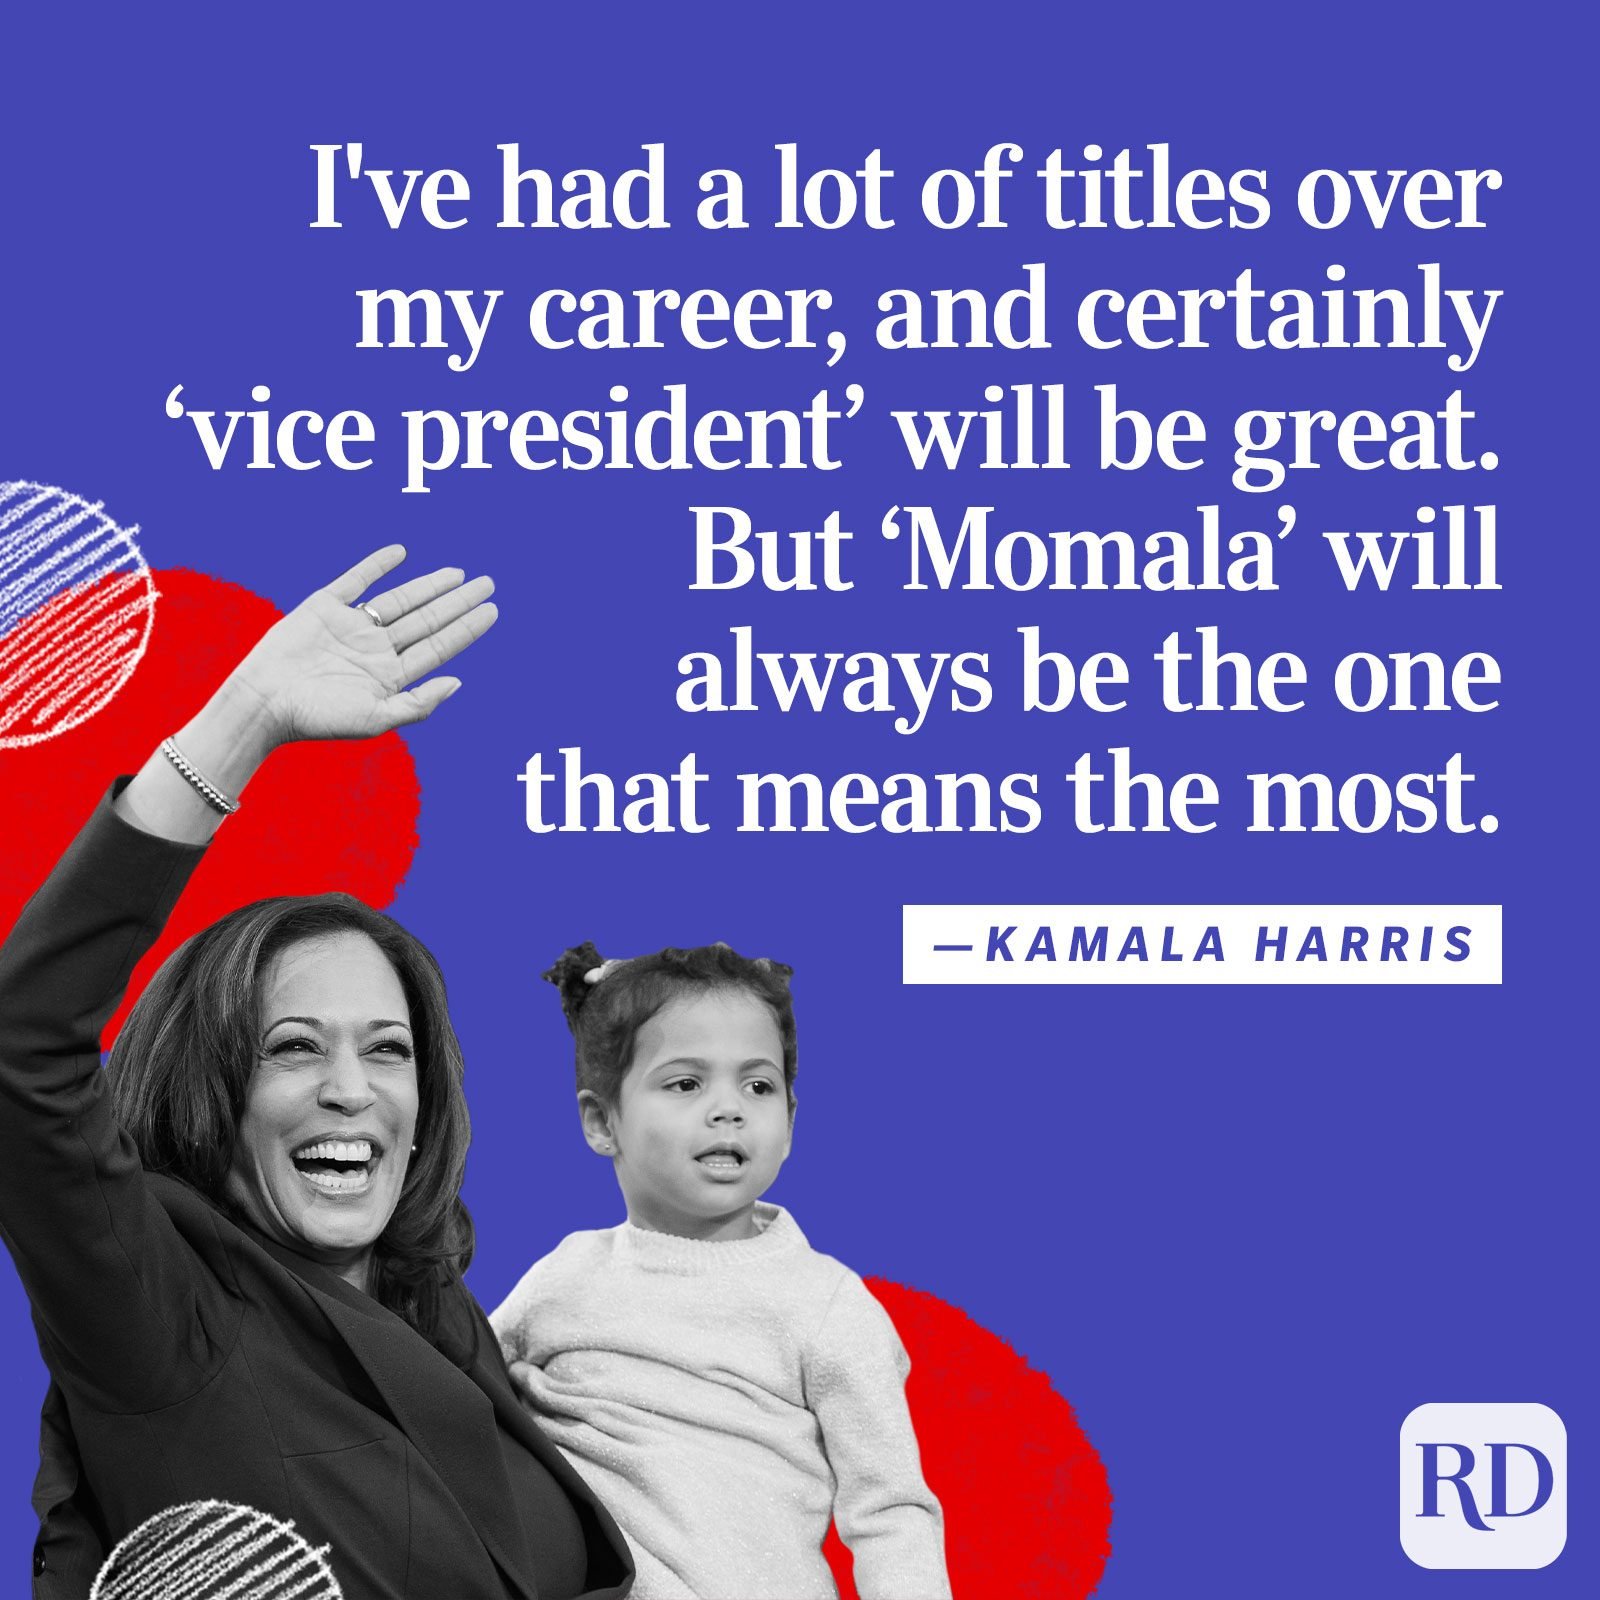 "I've had a lot of titles over my career, and certainly 'vice president' will be great. But 'Momala' will always be the one that means the most."